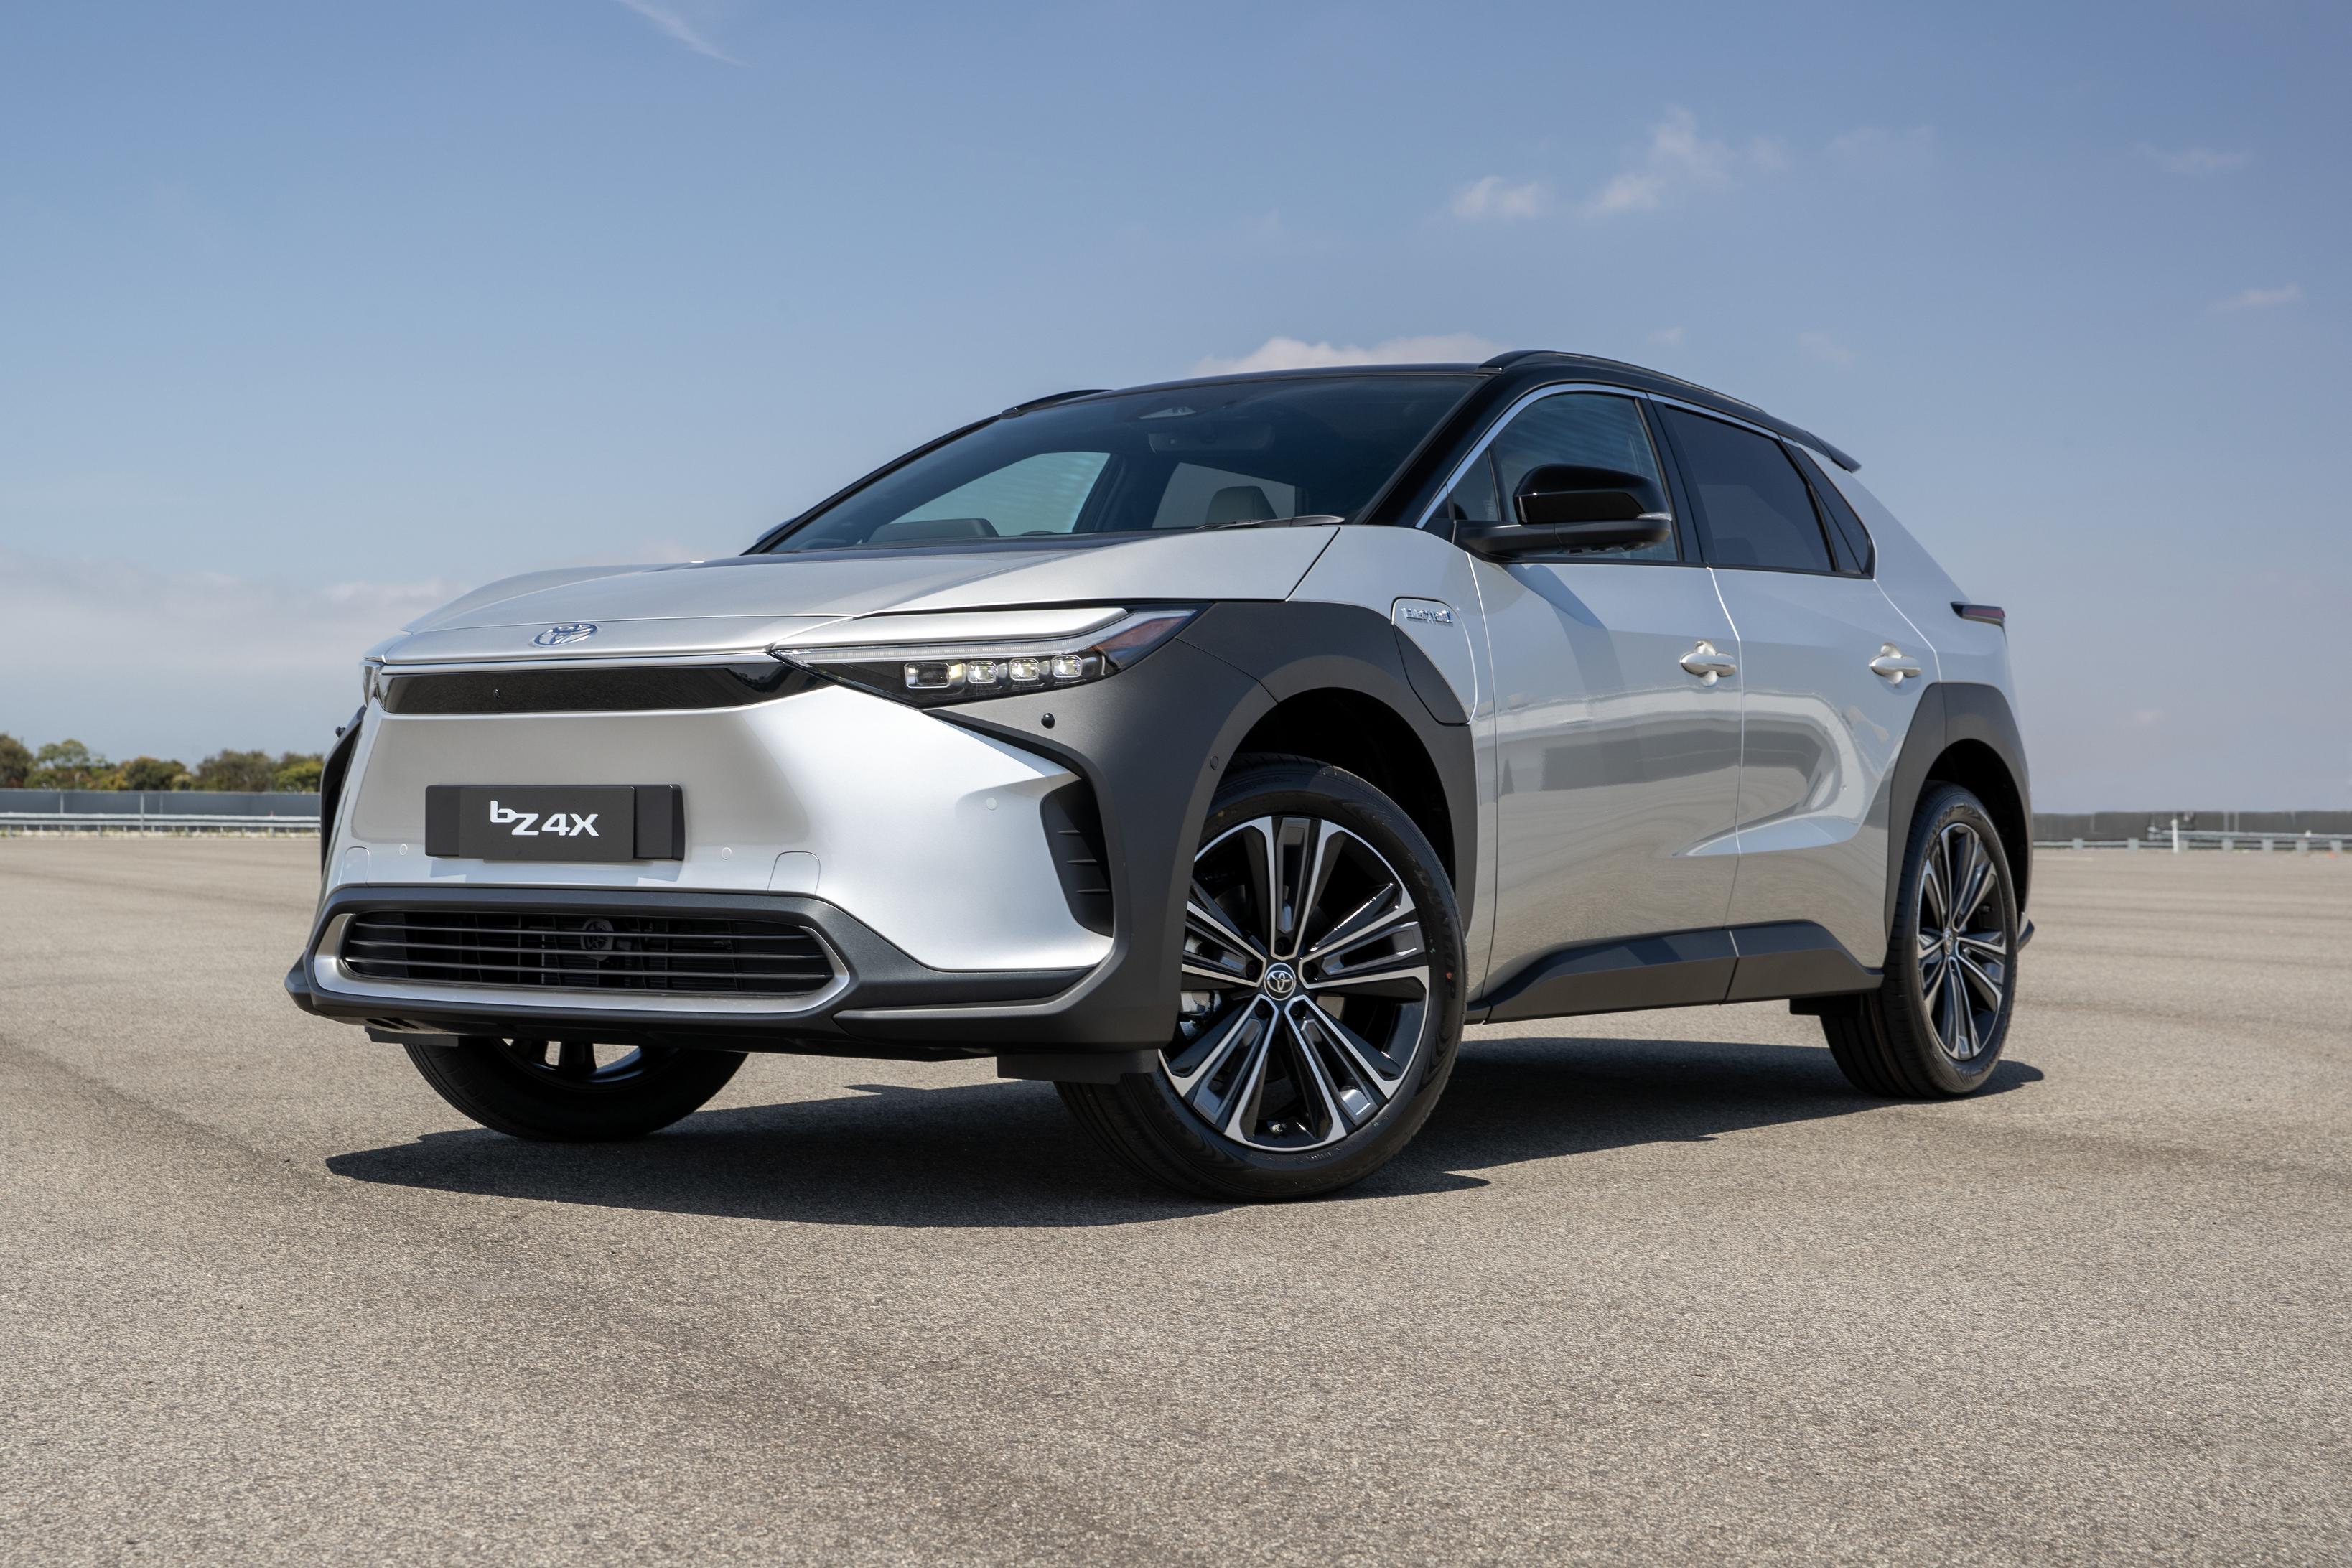 Toyota bZ4X EV expected to top RAV4 in many ways, but not sales